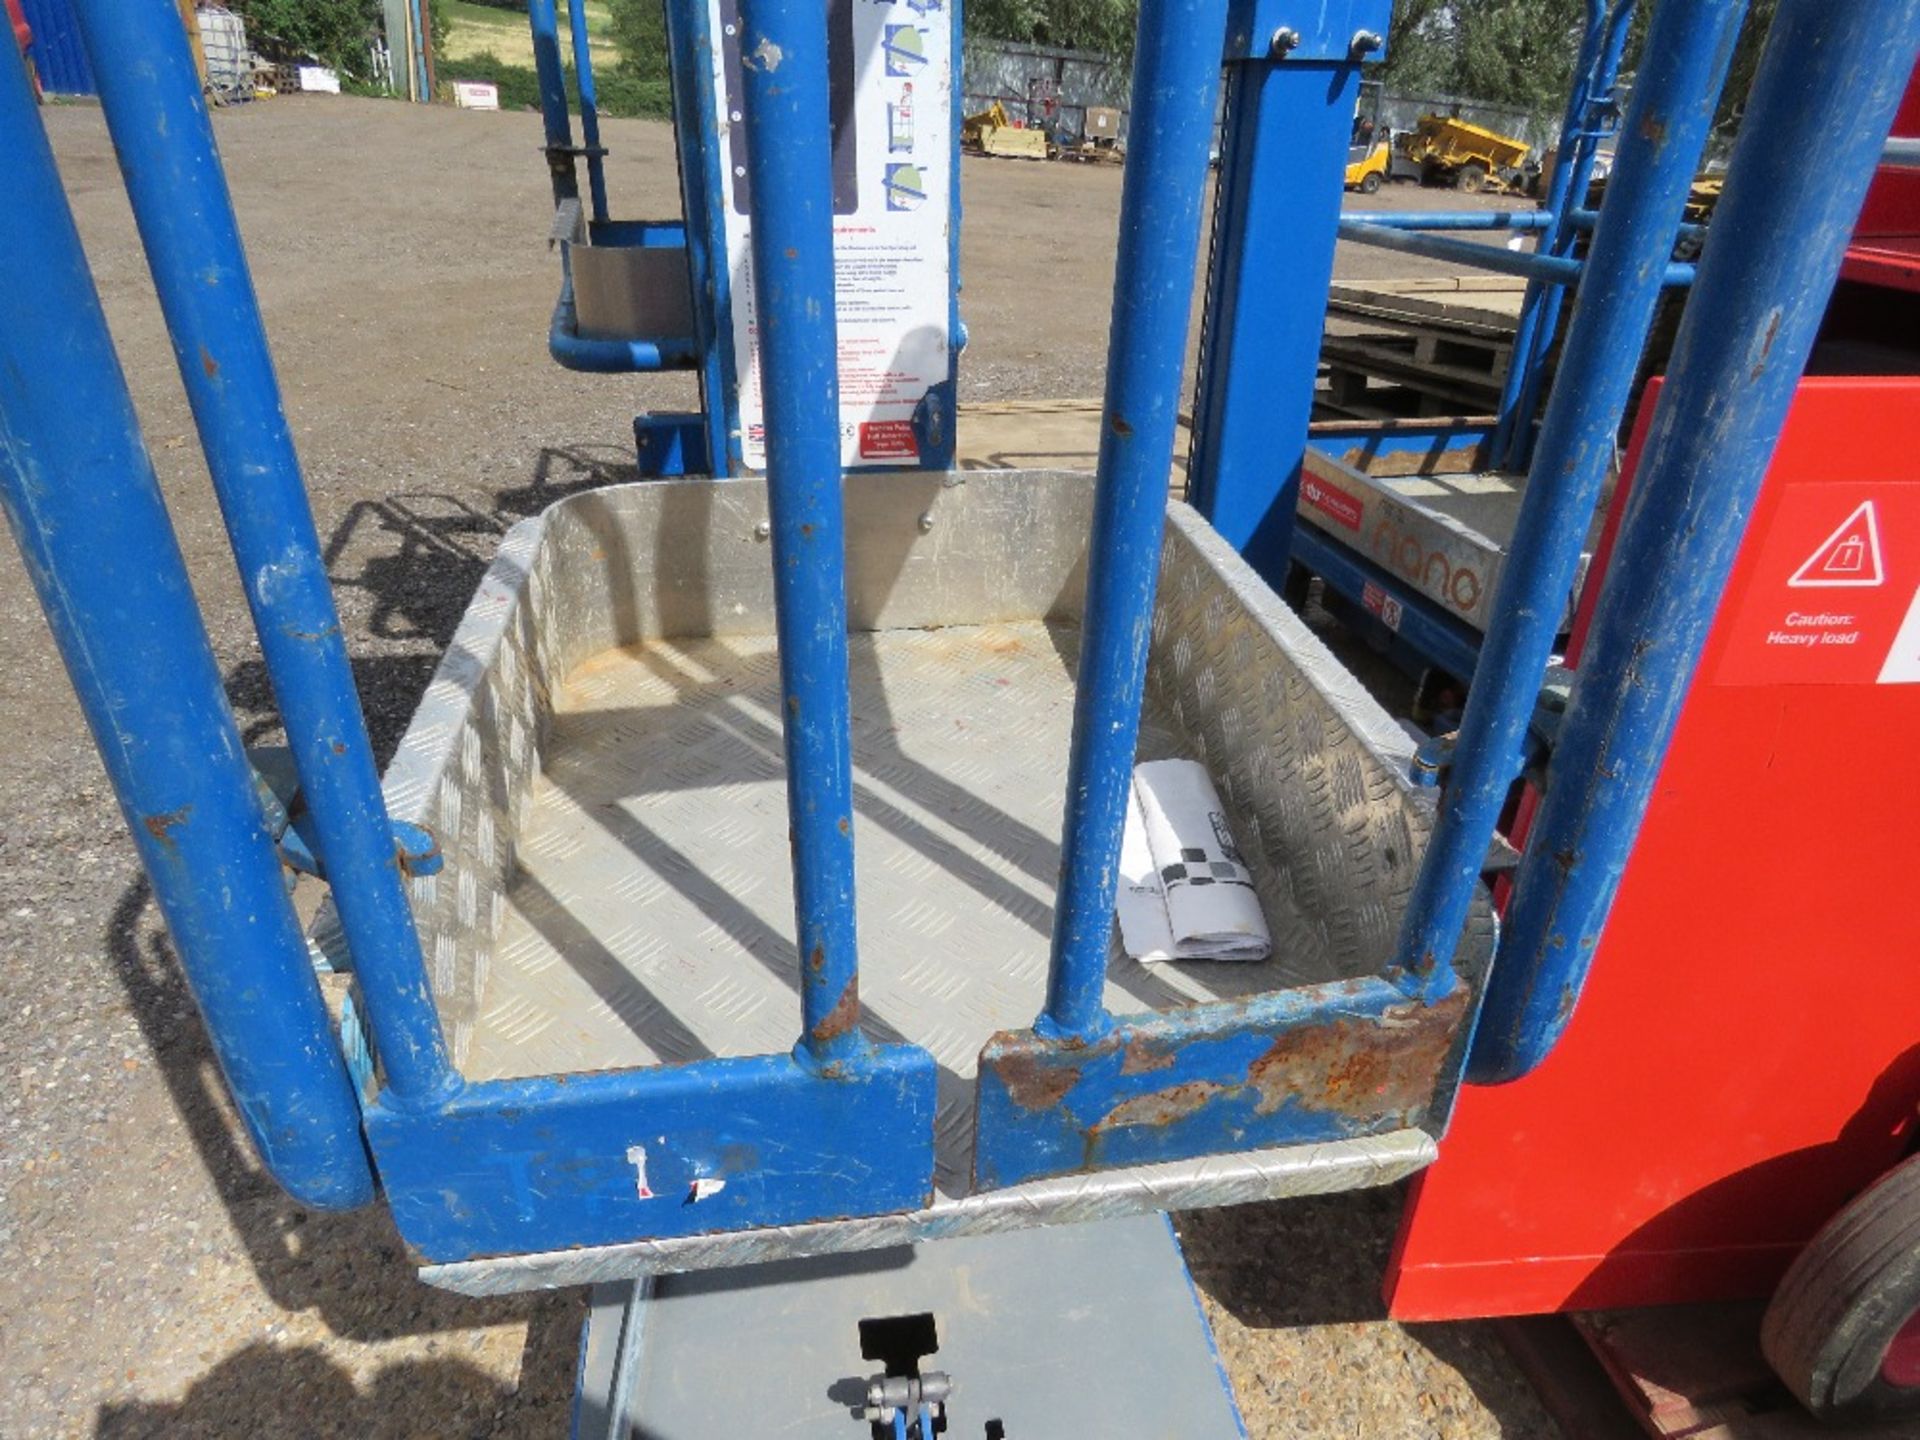 POWER TOWER PECOLIFT MANUAL OPERATED MAST ACCESS PLATFORM, YEAR 2015. WHEN TESTED WAS SEEN TO RAISE - Image 3 of 4